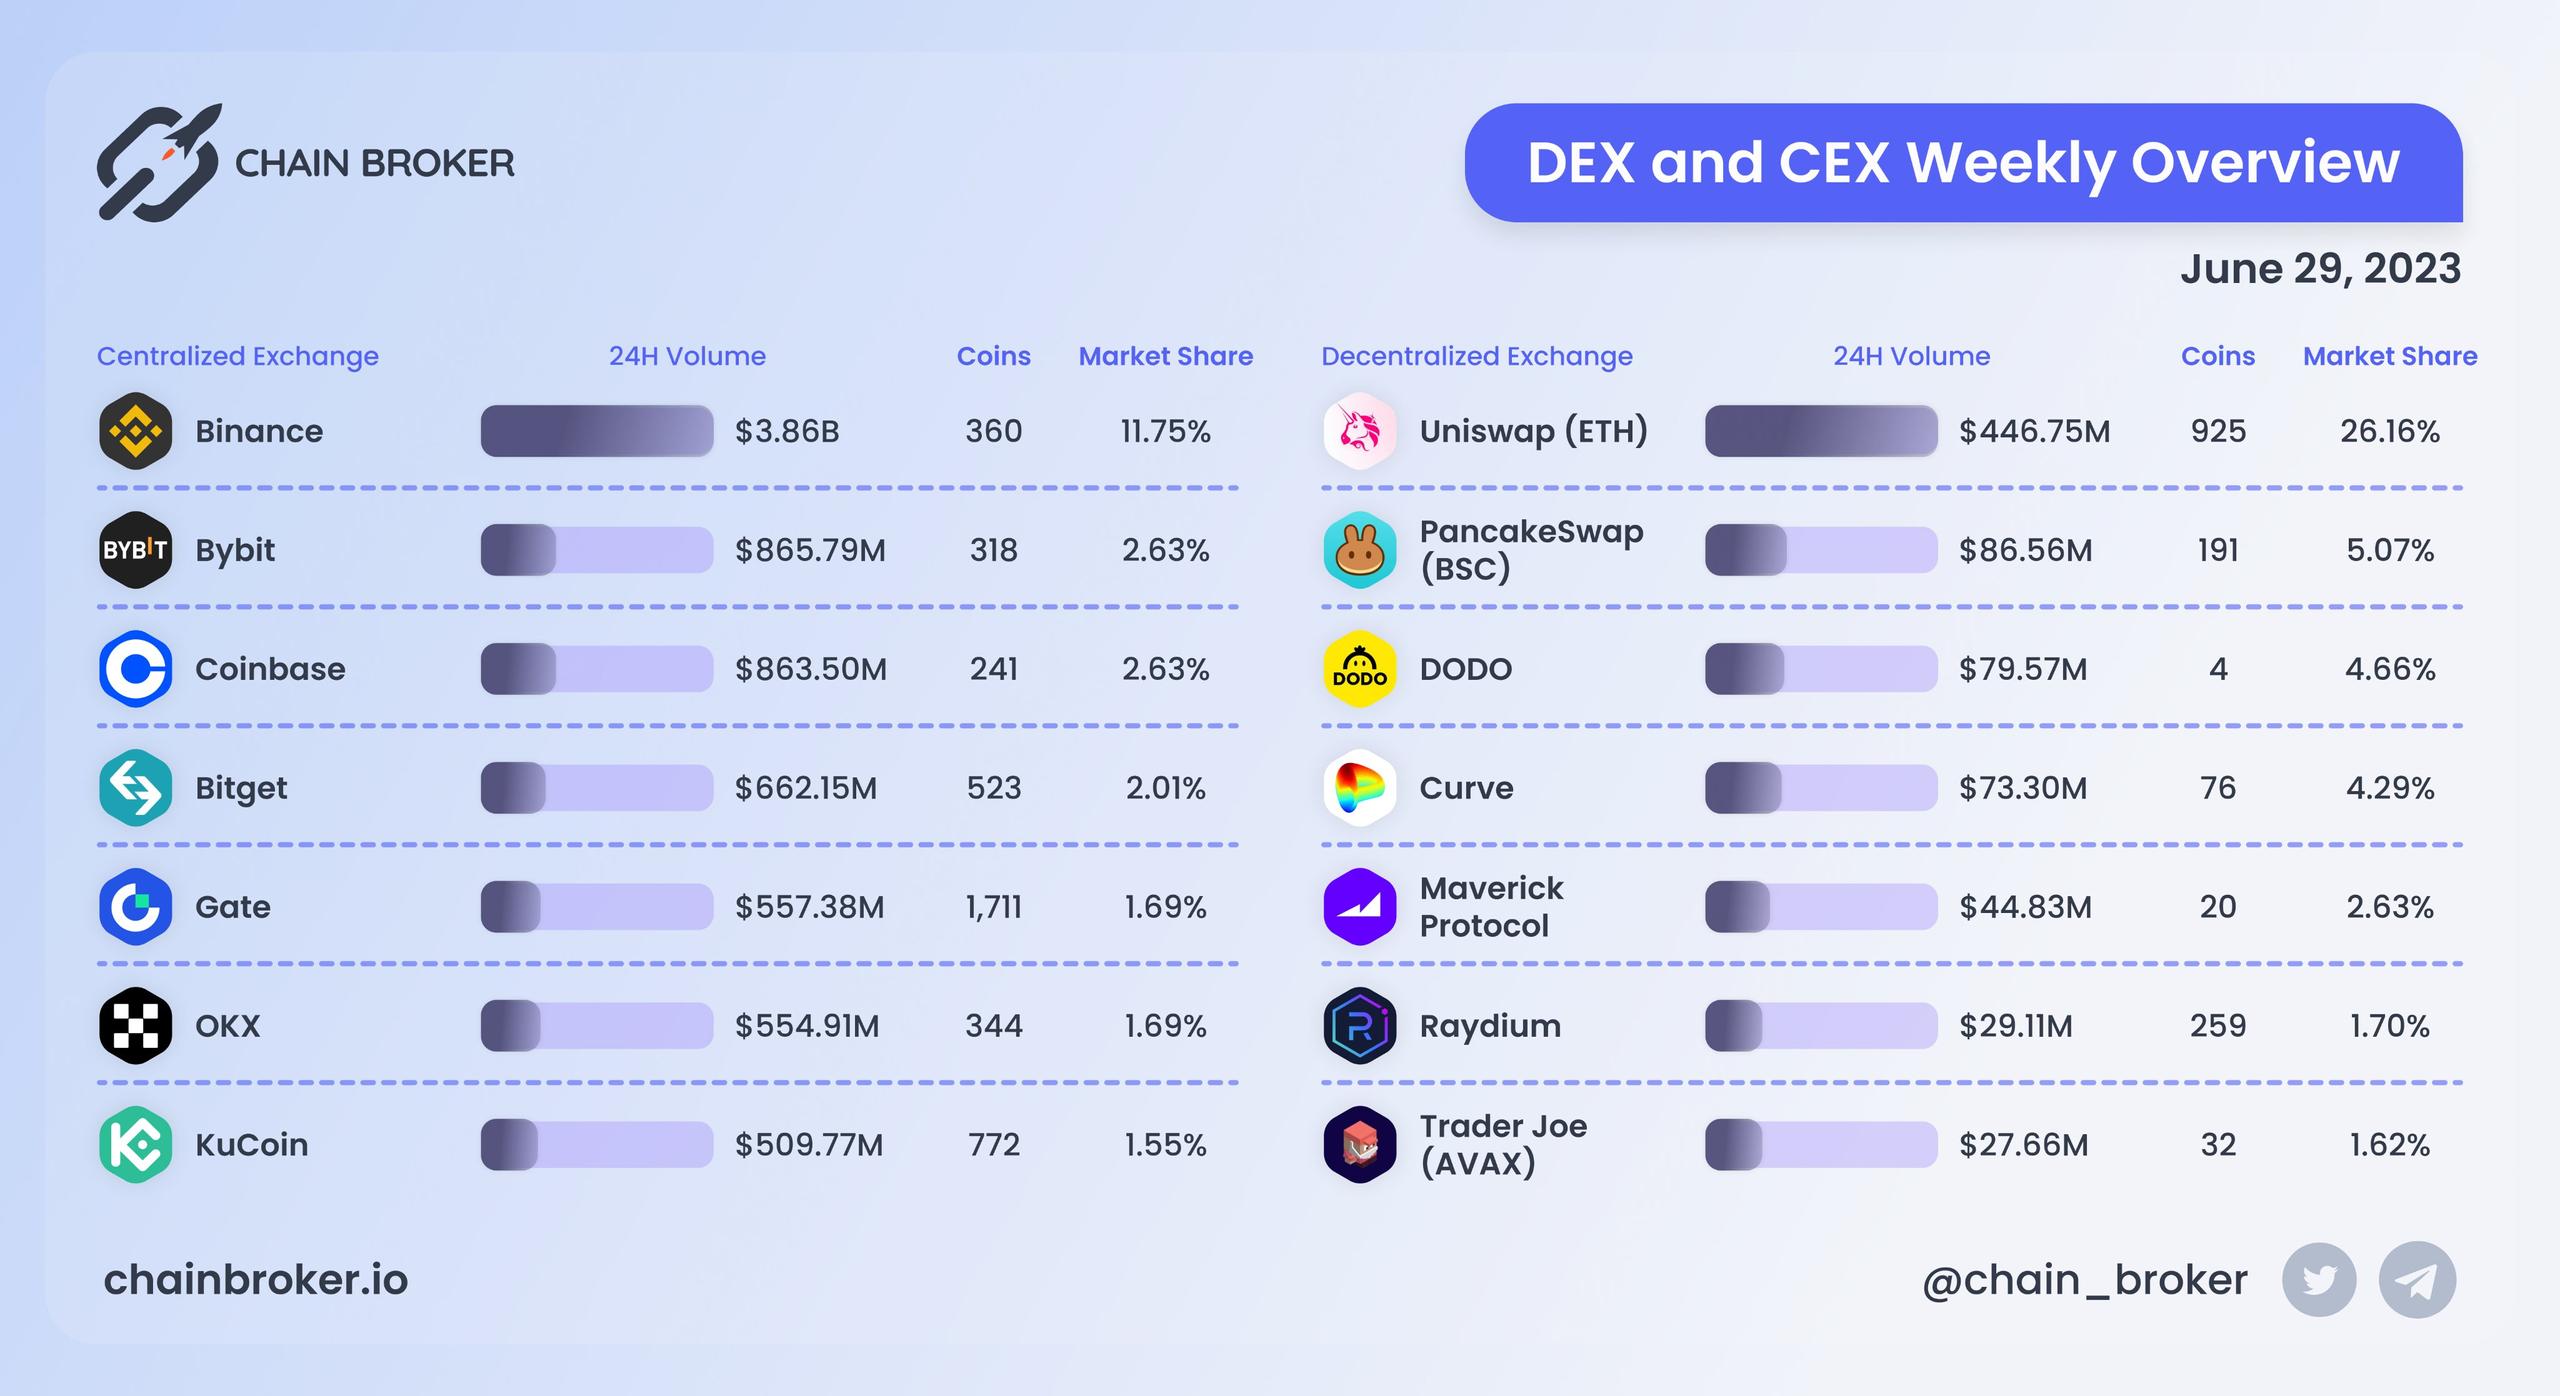 DEX and CEX overview